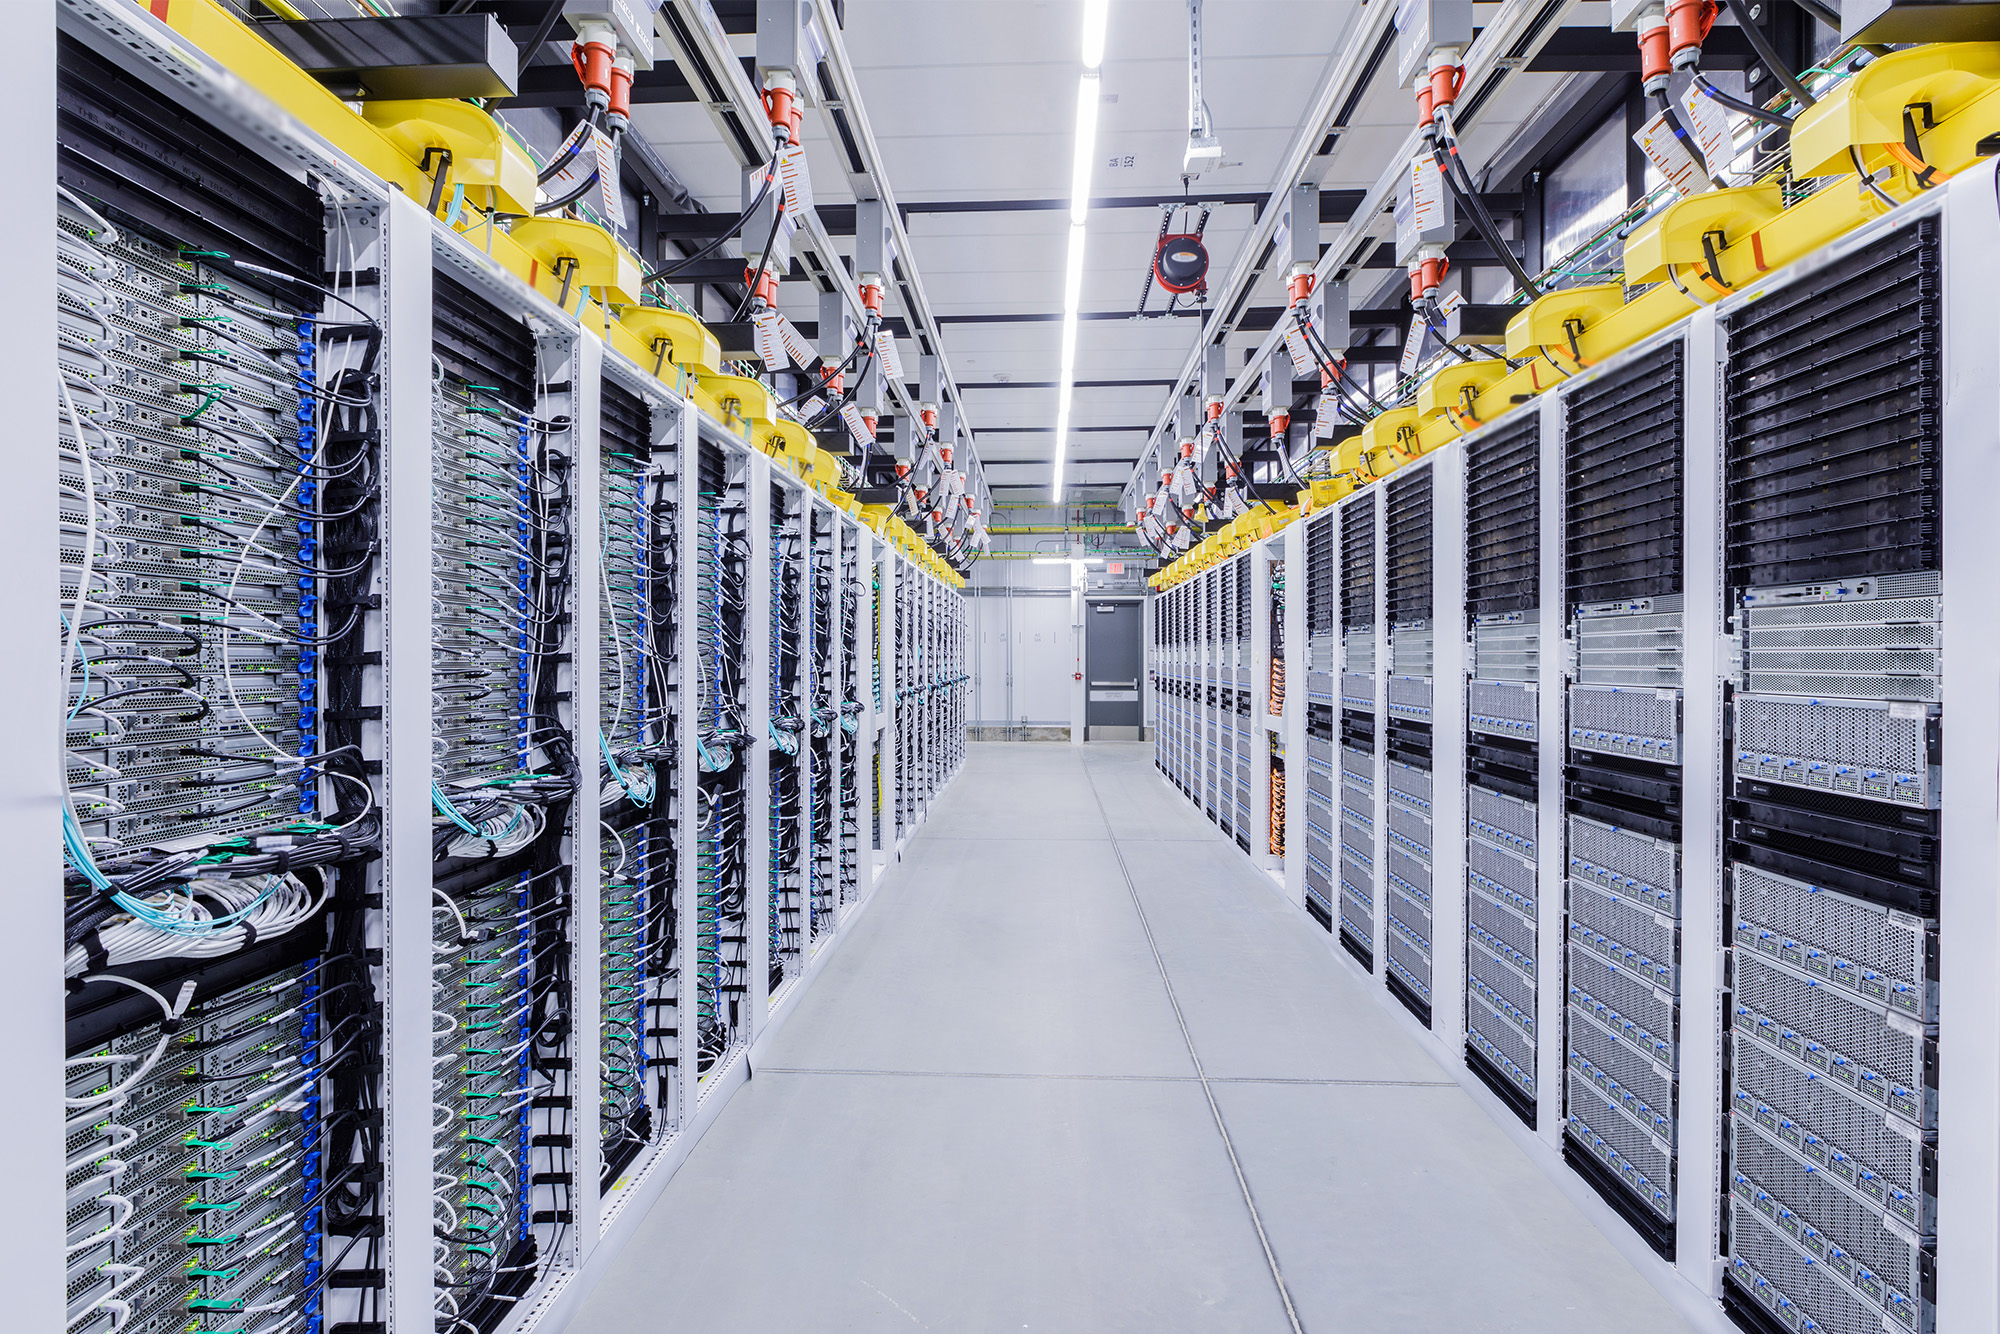 Racks of Graphics Processing Units, known as GPUs, are shown in a datacenter aisle.